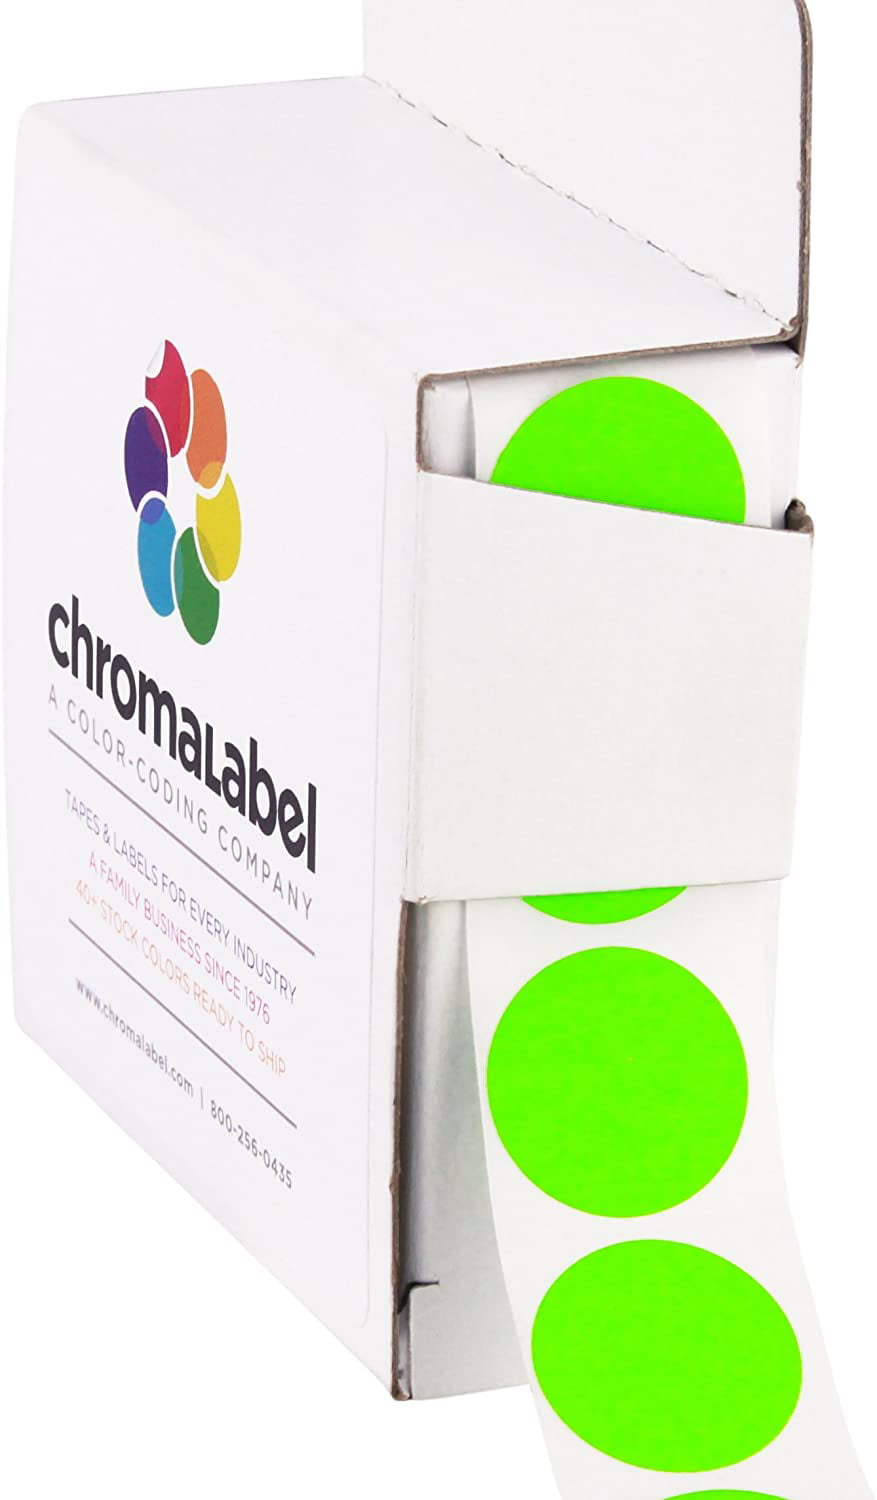 ChromaLabel 19mm (3/4 inch) Permanent ColourCode Dot Labels, 1000